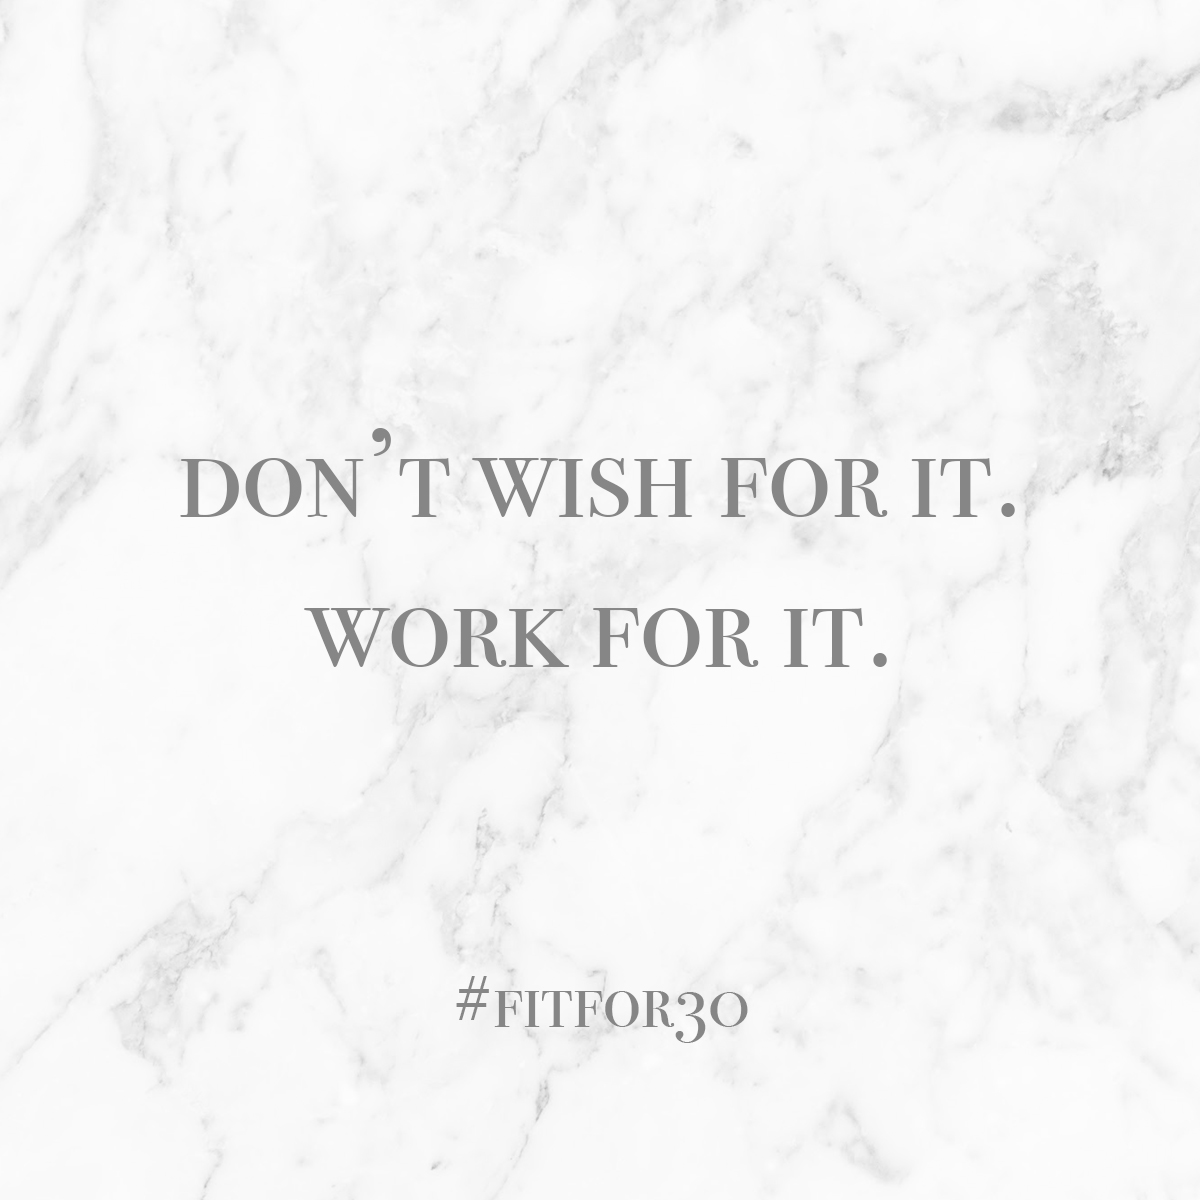 Don't wish for it, work for it. #fitfor30